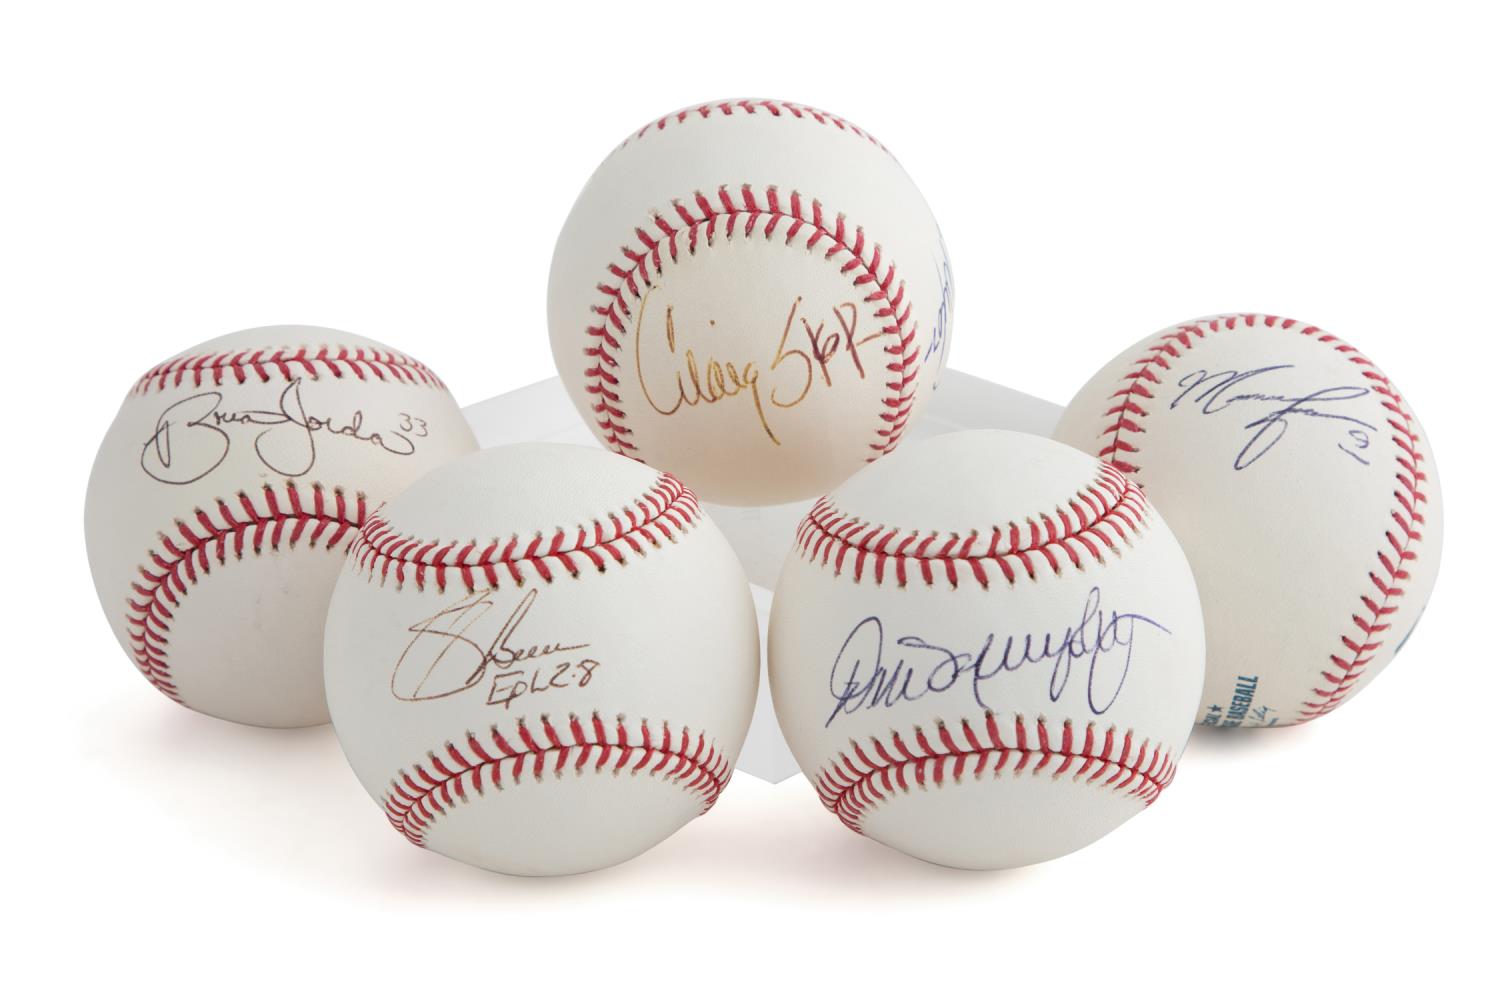 FIVE AUTOGRAPHED BASEBALLS Grouping 2bfcd1